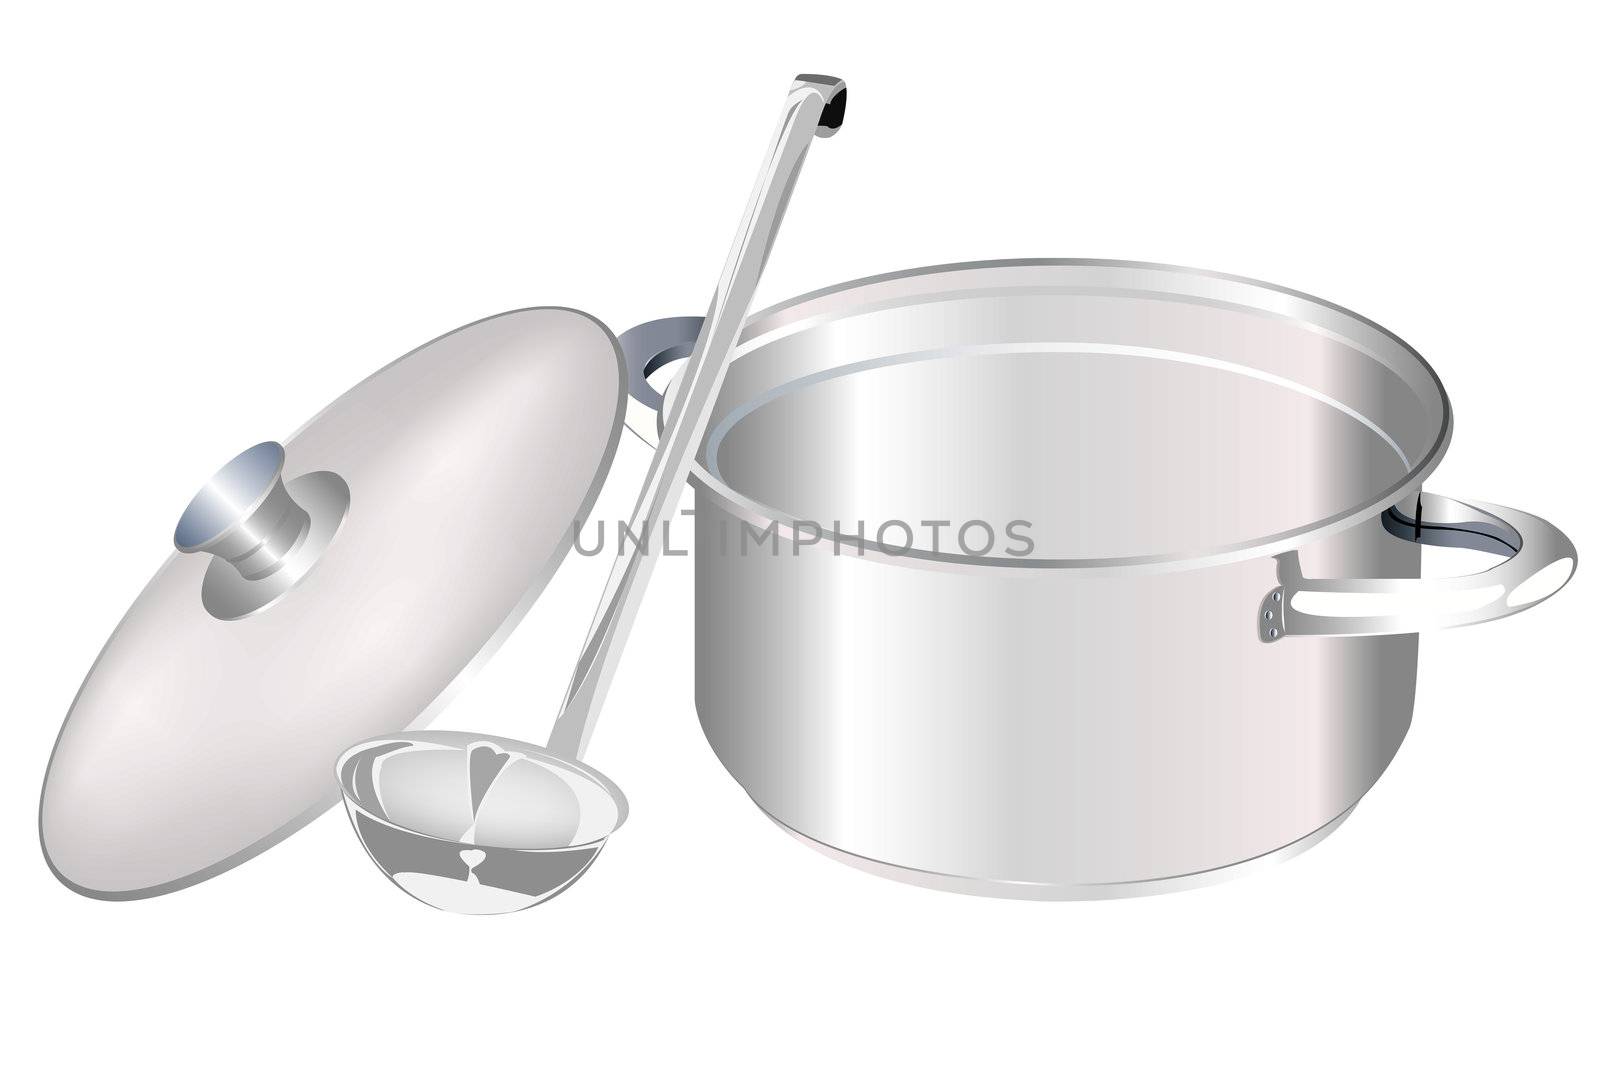 Saucepan and big spoon on a white background by sergey150770SV